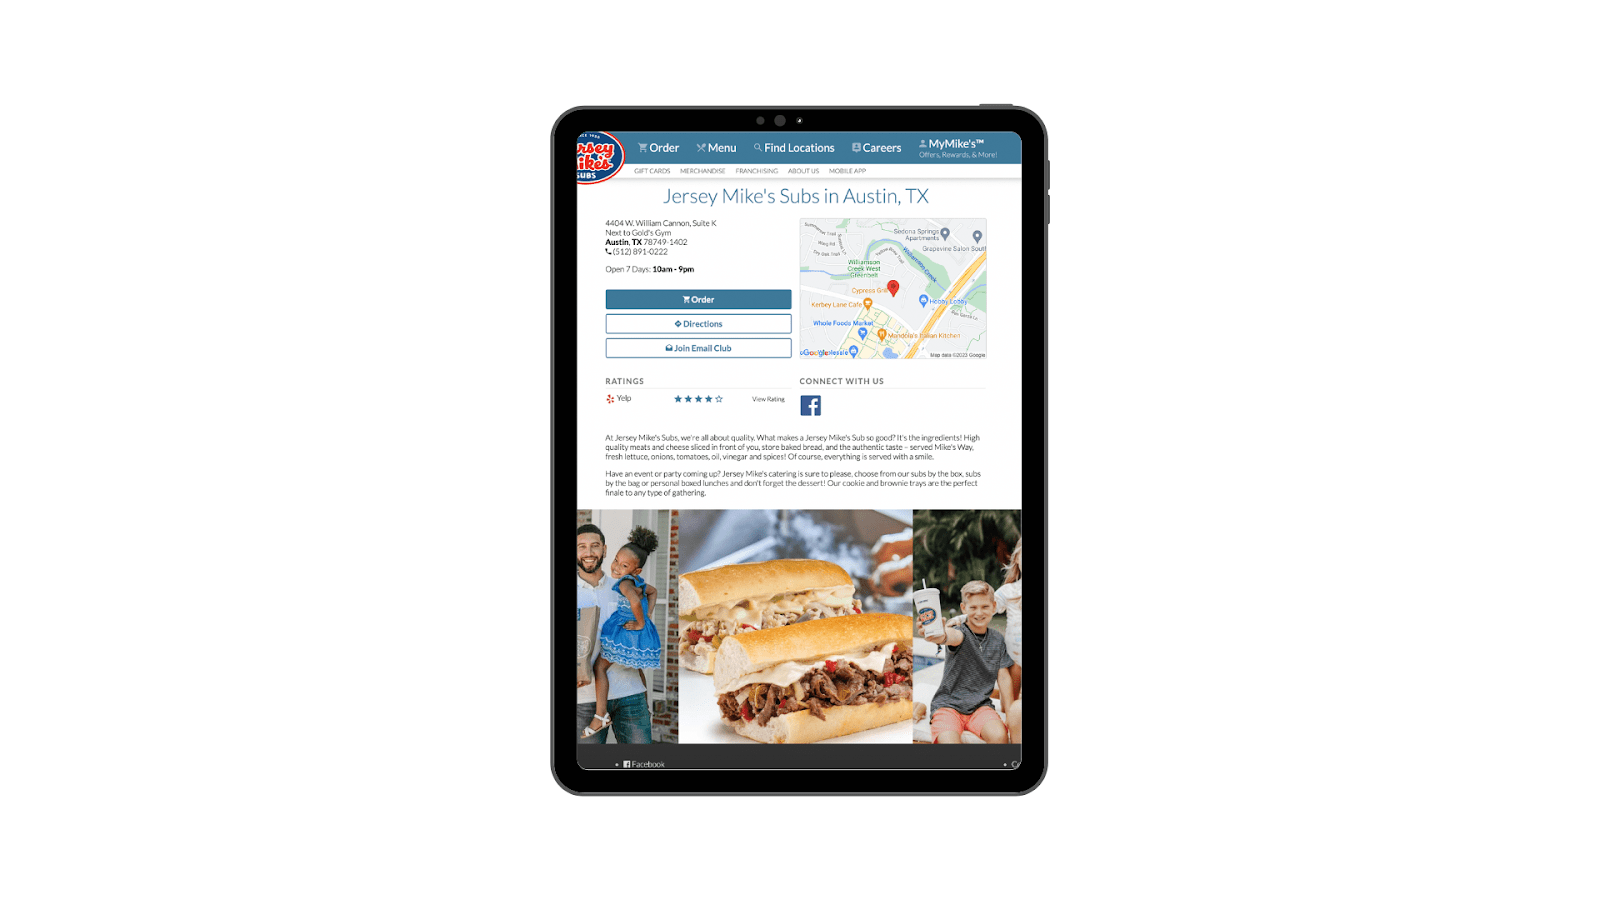 An image showing Jersey Mike's Subs' local landing page that includes high quality imagery